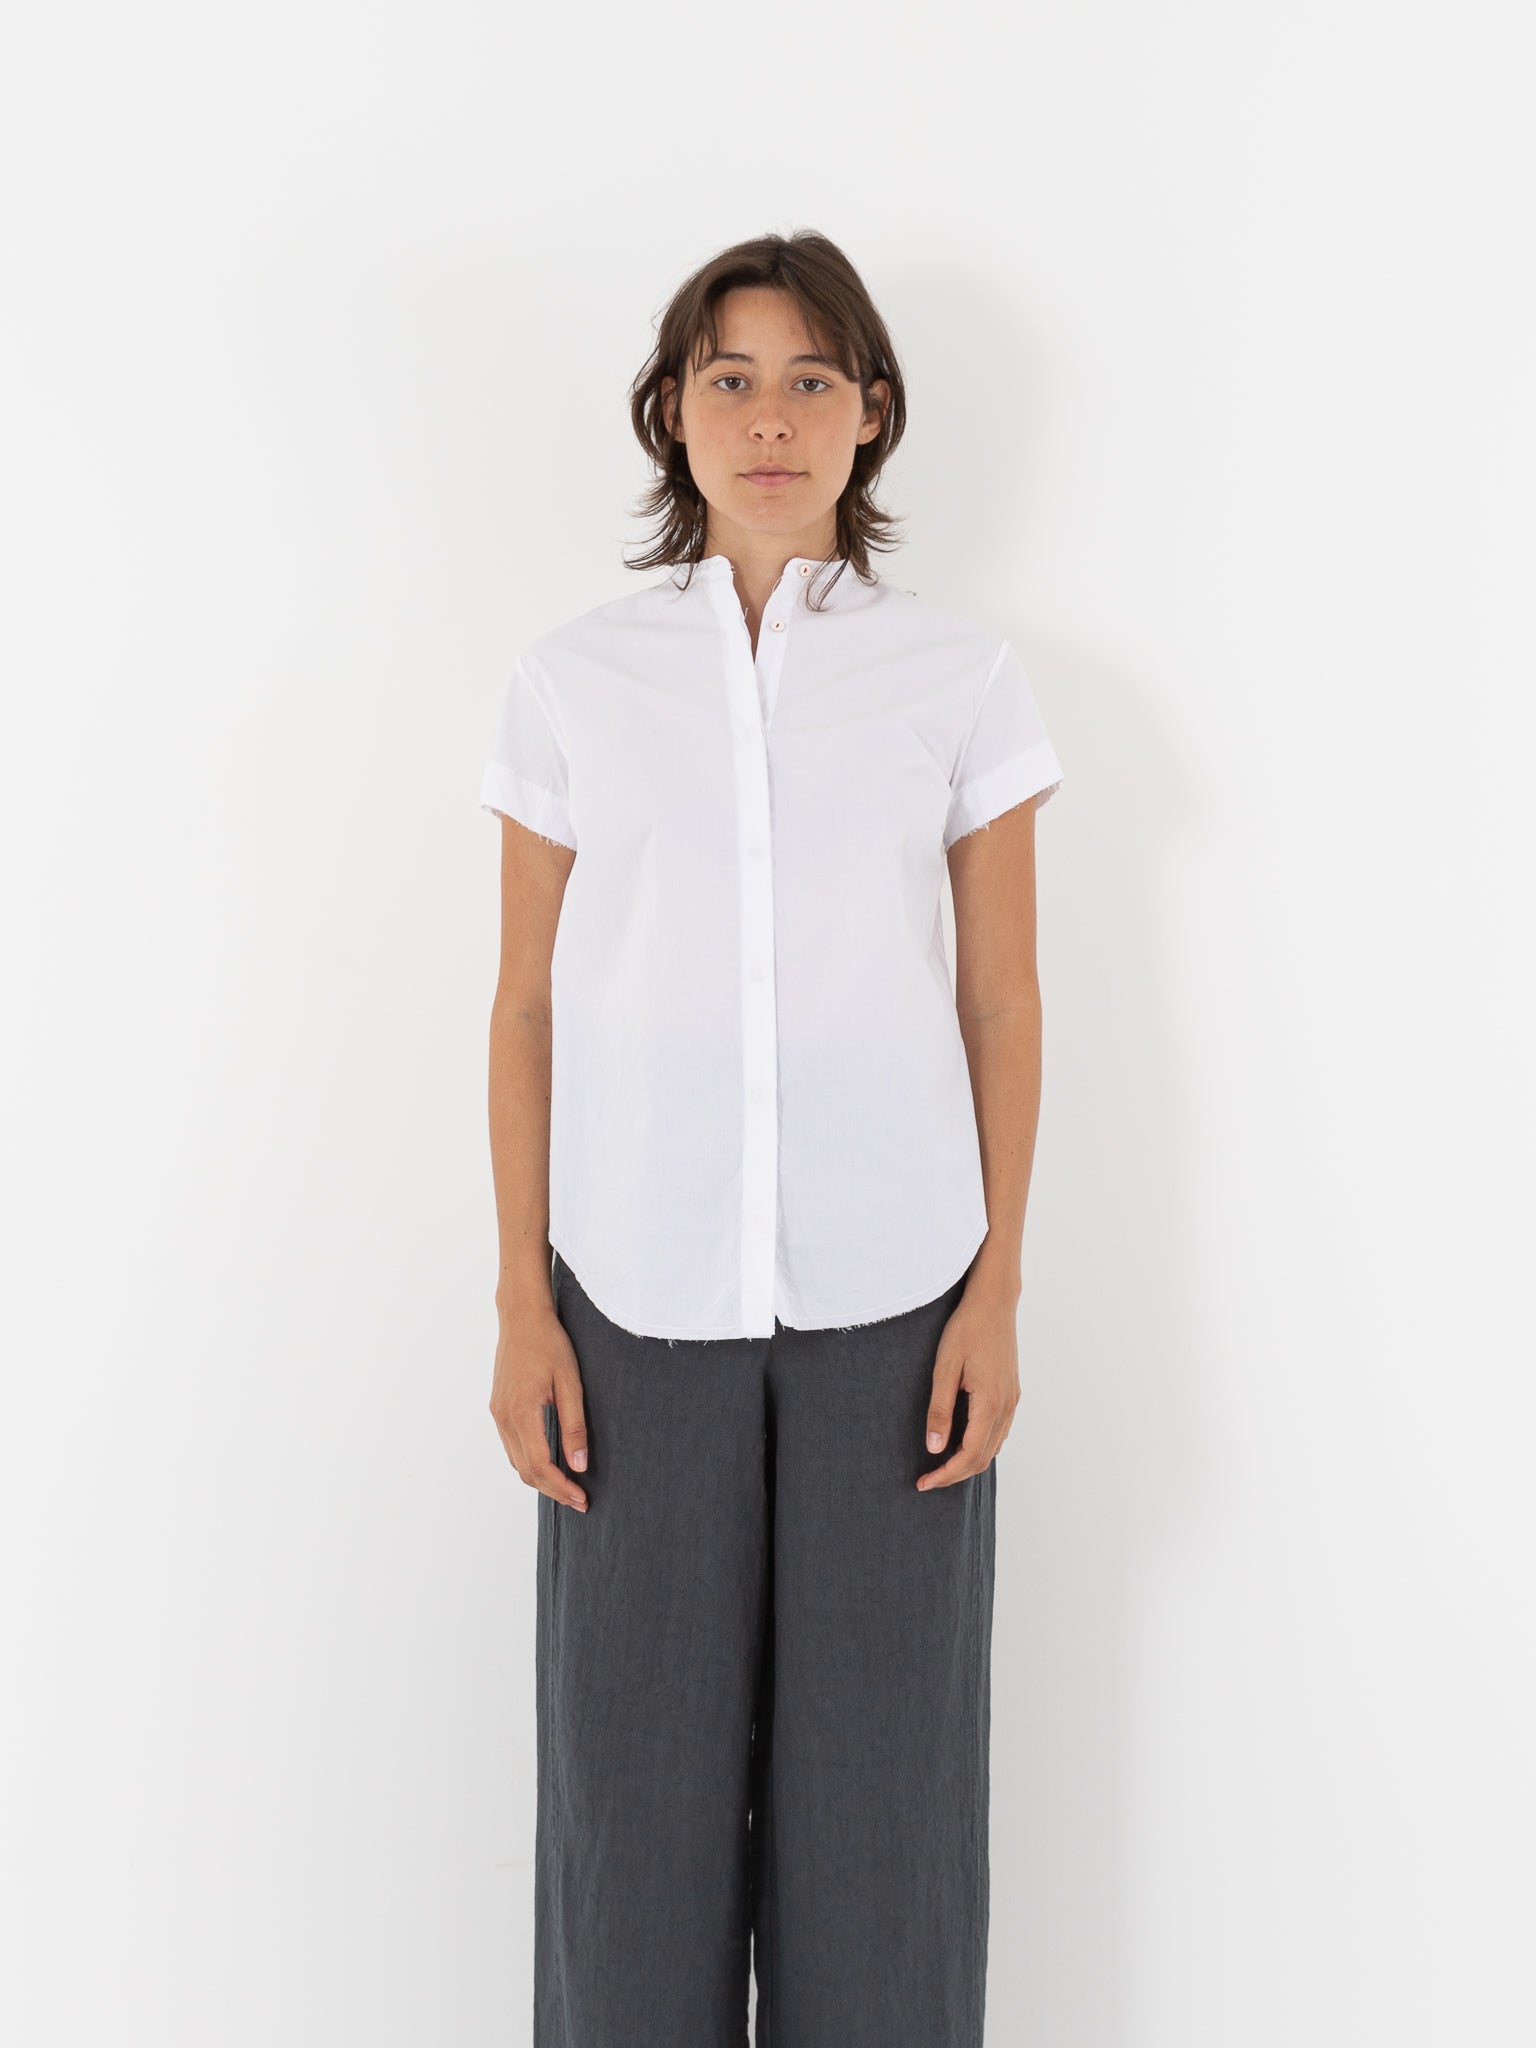 Hannoh Wessel Clementine Shirt - Worthwhile, Inc.